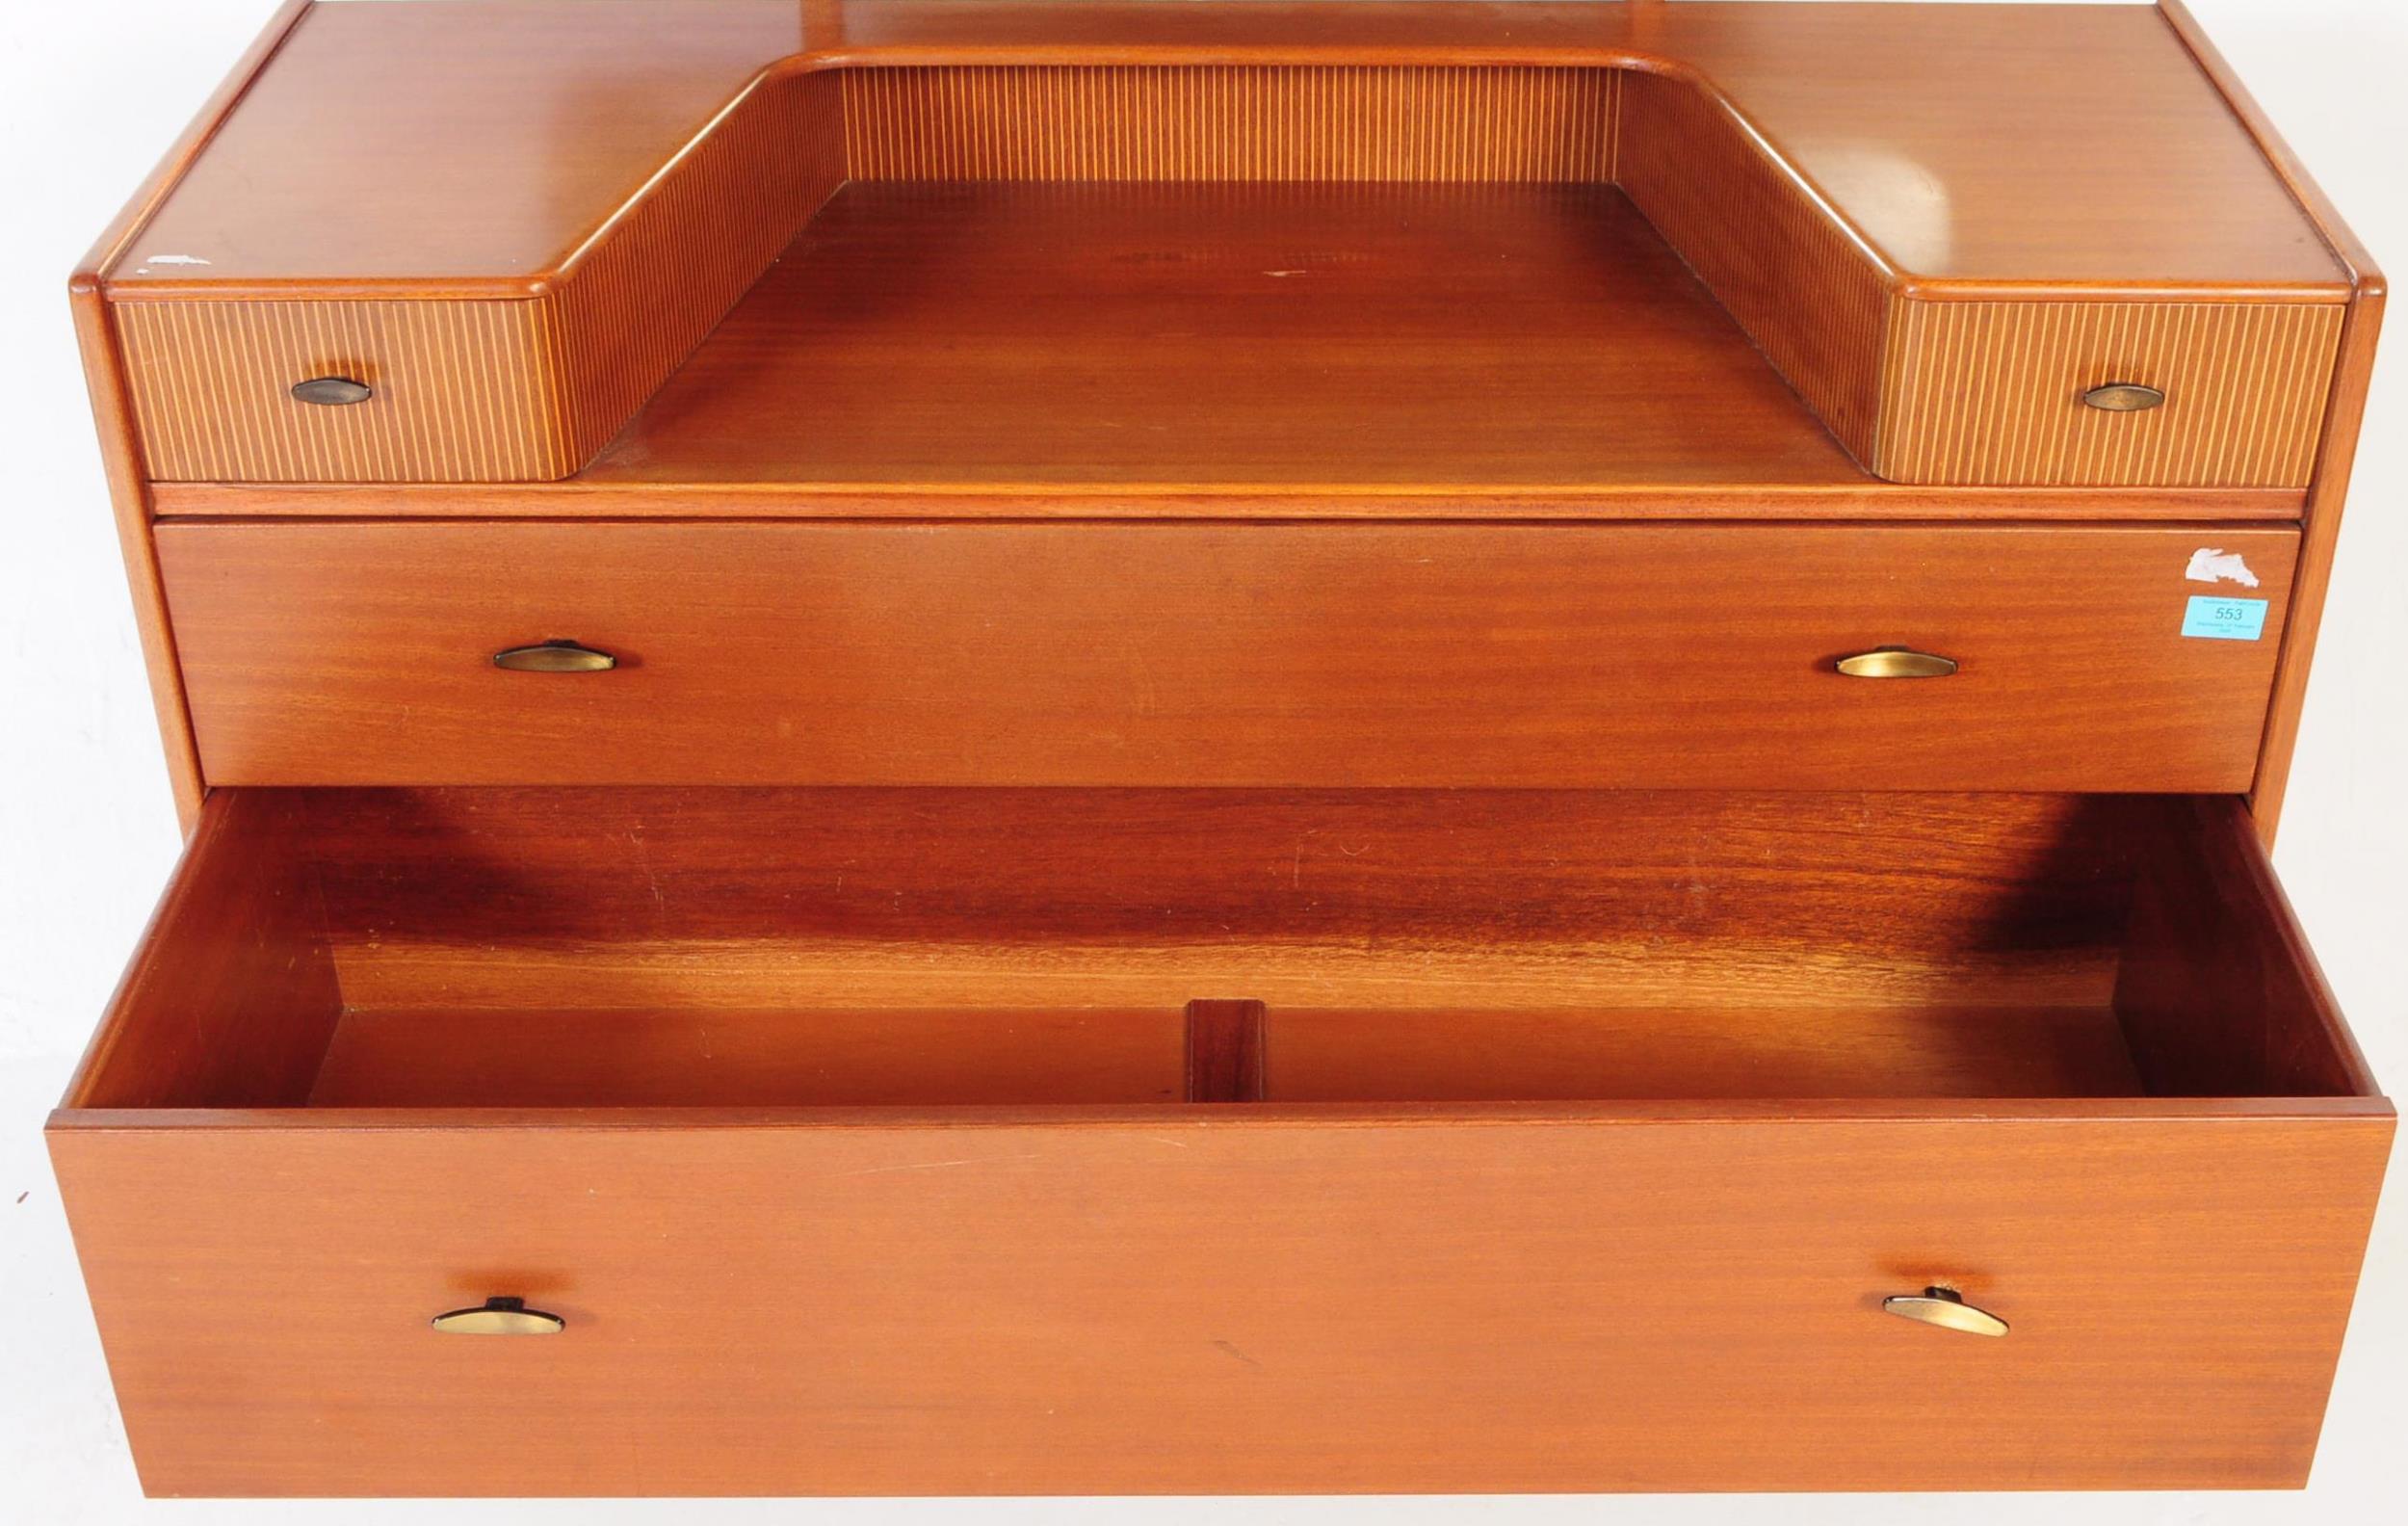 RETRO MID CENTURY TEAK DRESSING TABLE CHEST OF DRAWERS - Image 6 of 8